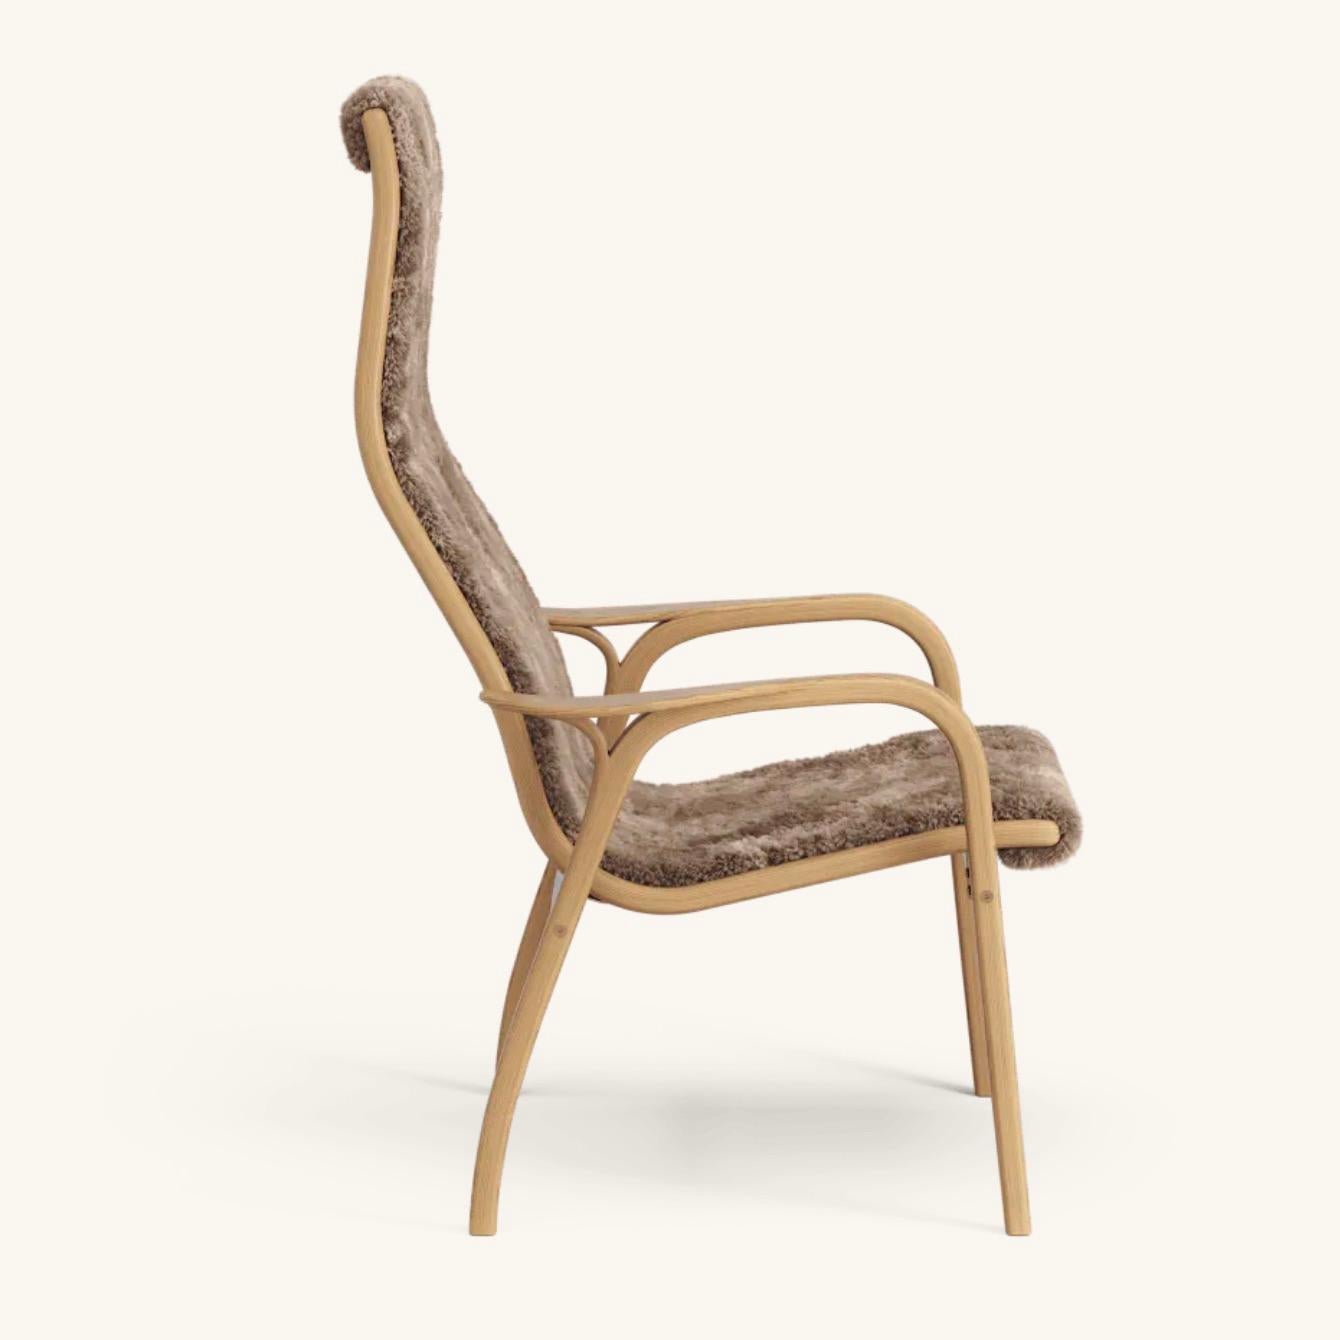 Yngve Ekström Lamino easy chair by Swedese in Oak and 'Sahara' Sheepskin. New, design from 1956.

The Lamino by Yngve Ekström is one of the most iconic Scandinavian easy chairs. Designed in 1956, this chair has never gotten out of style. Due to